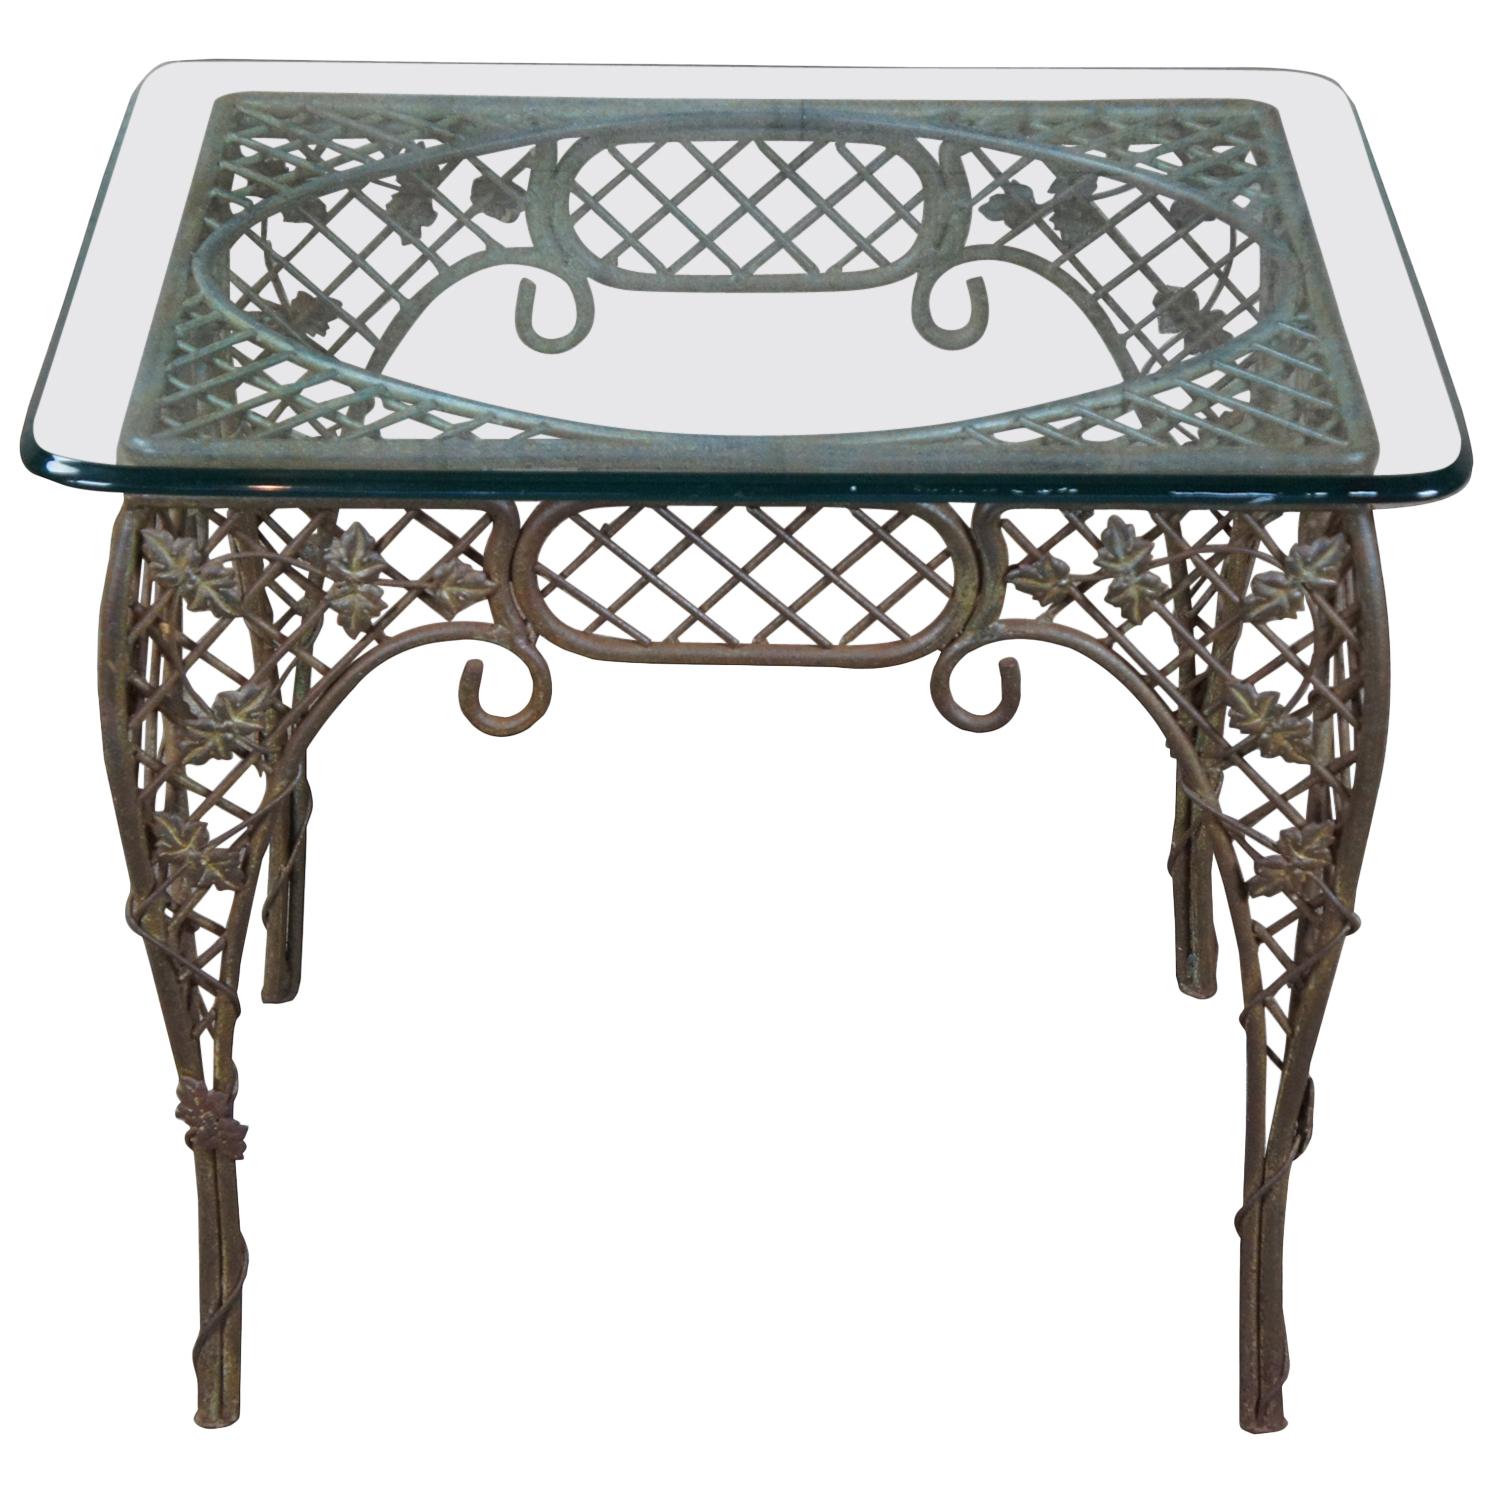 Vintage French Wrought Iron Lattice Maple Leaf Design Outdoor Side Patio Table